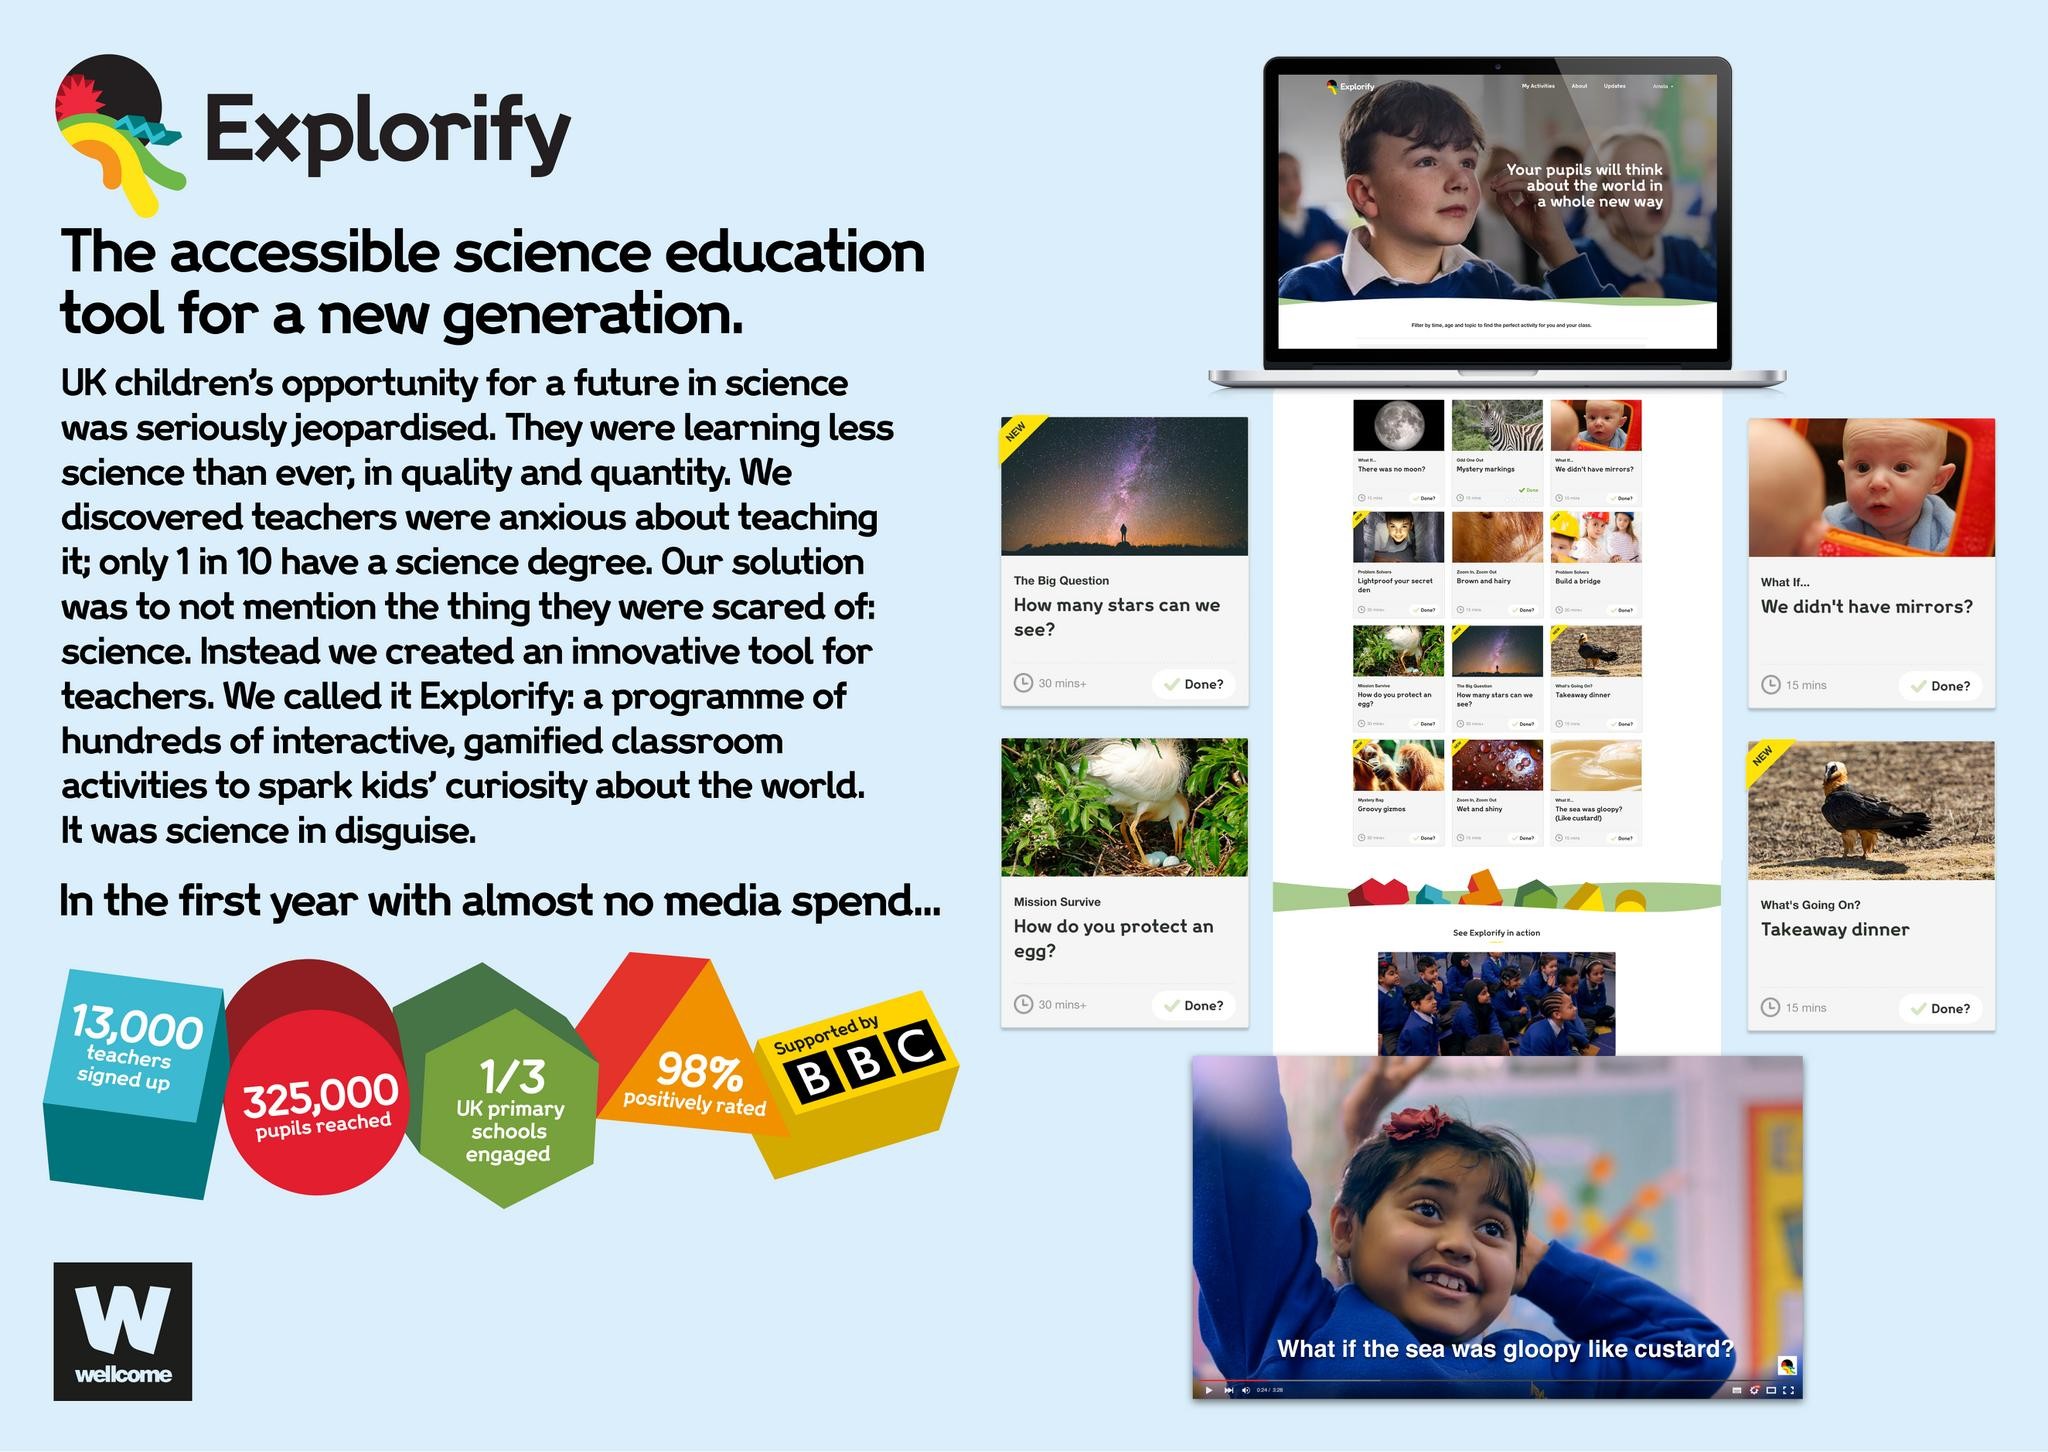 Explorify: The accessible science education tool for a new generation